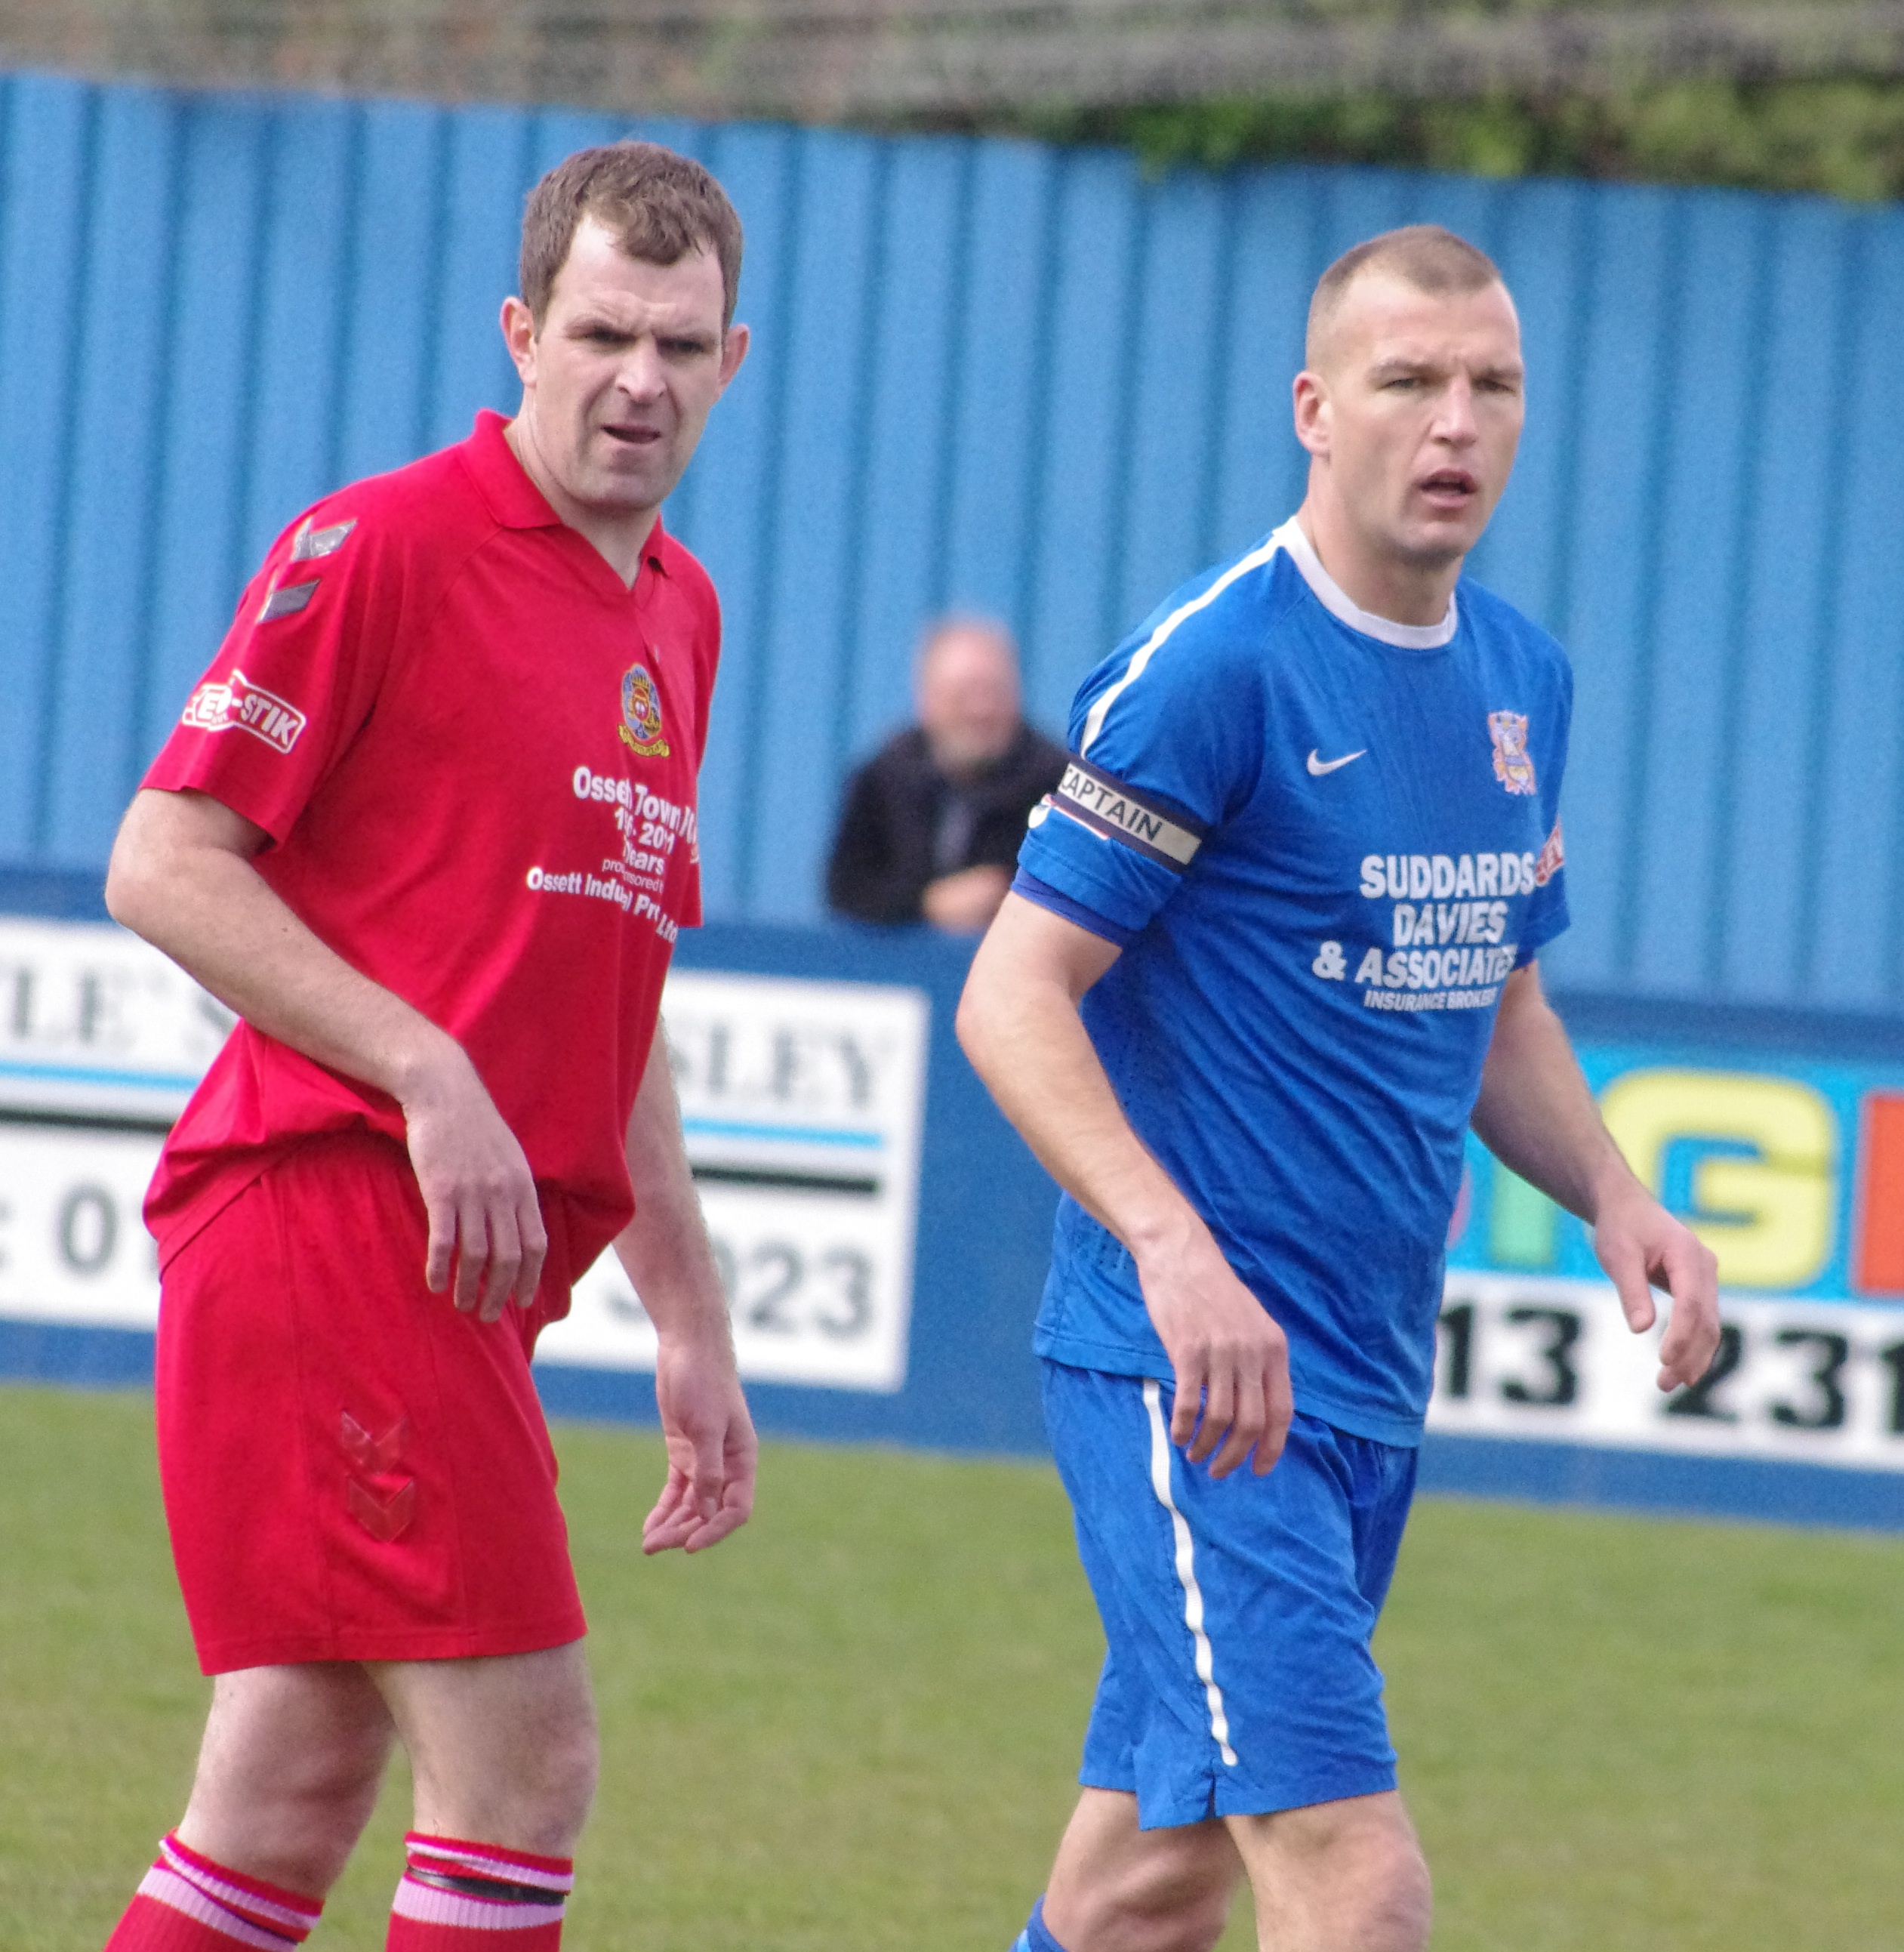 Lee Connor (right) came out of retirement to help Ossett Town out on Saturday at his former club Farsley AFC